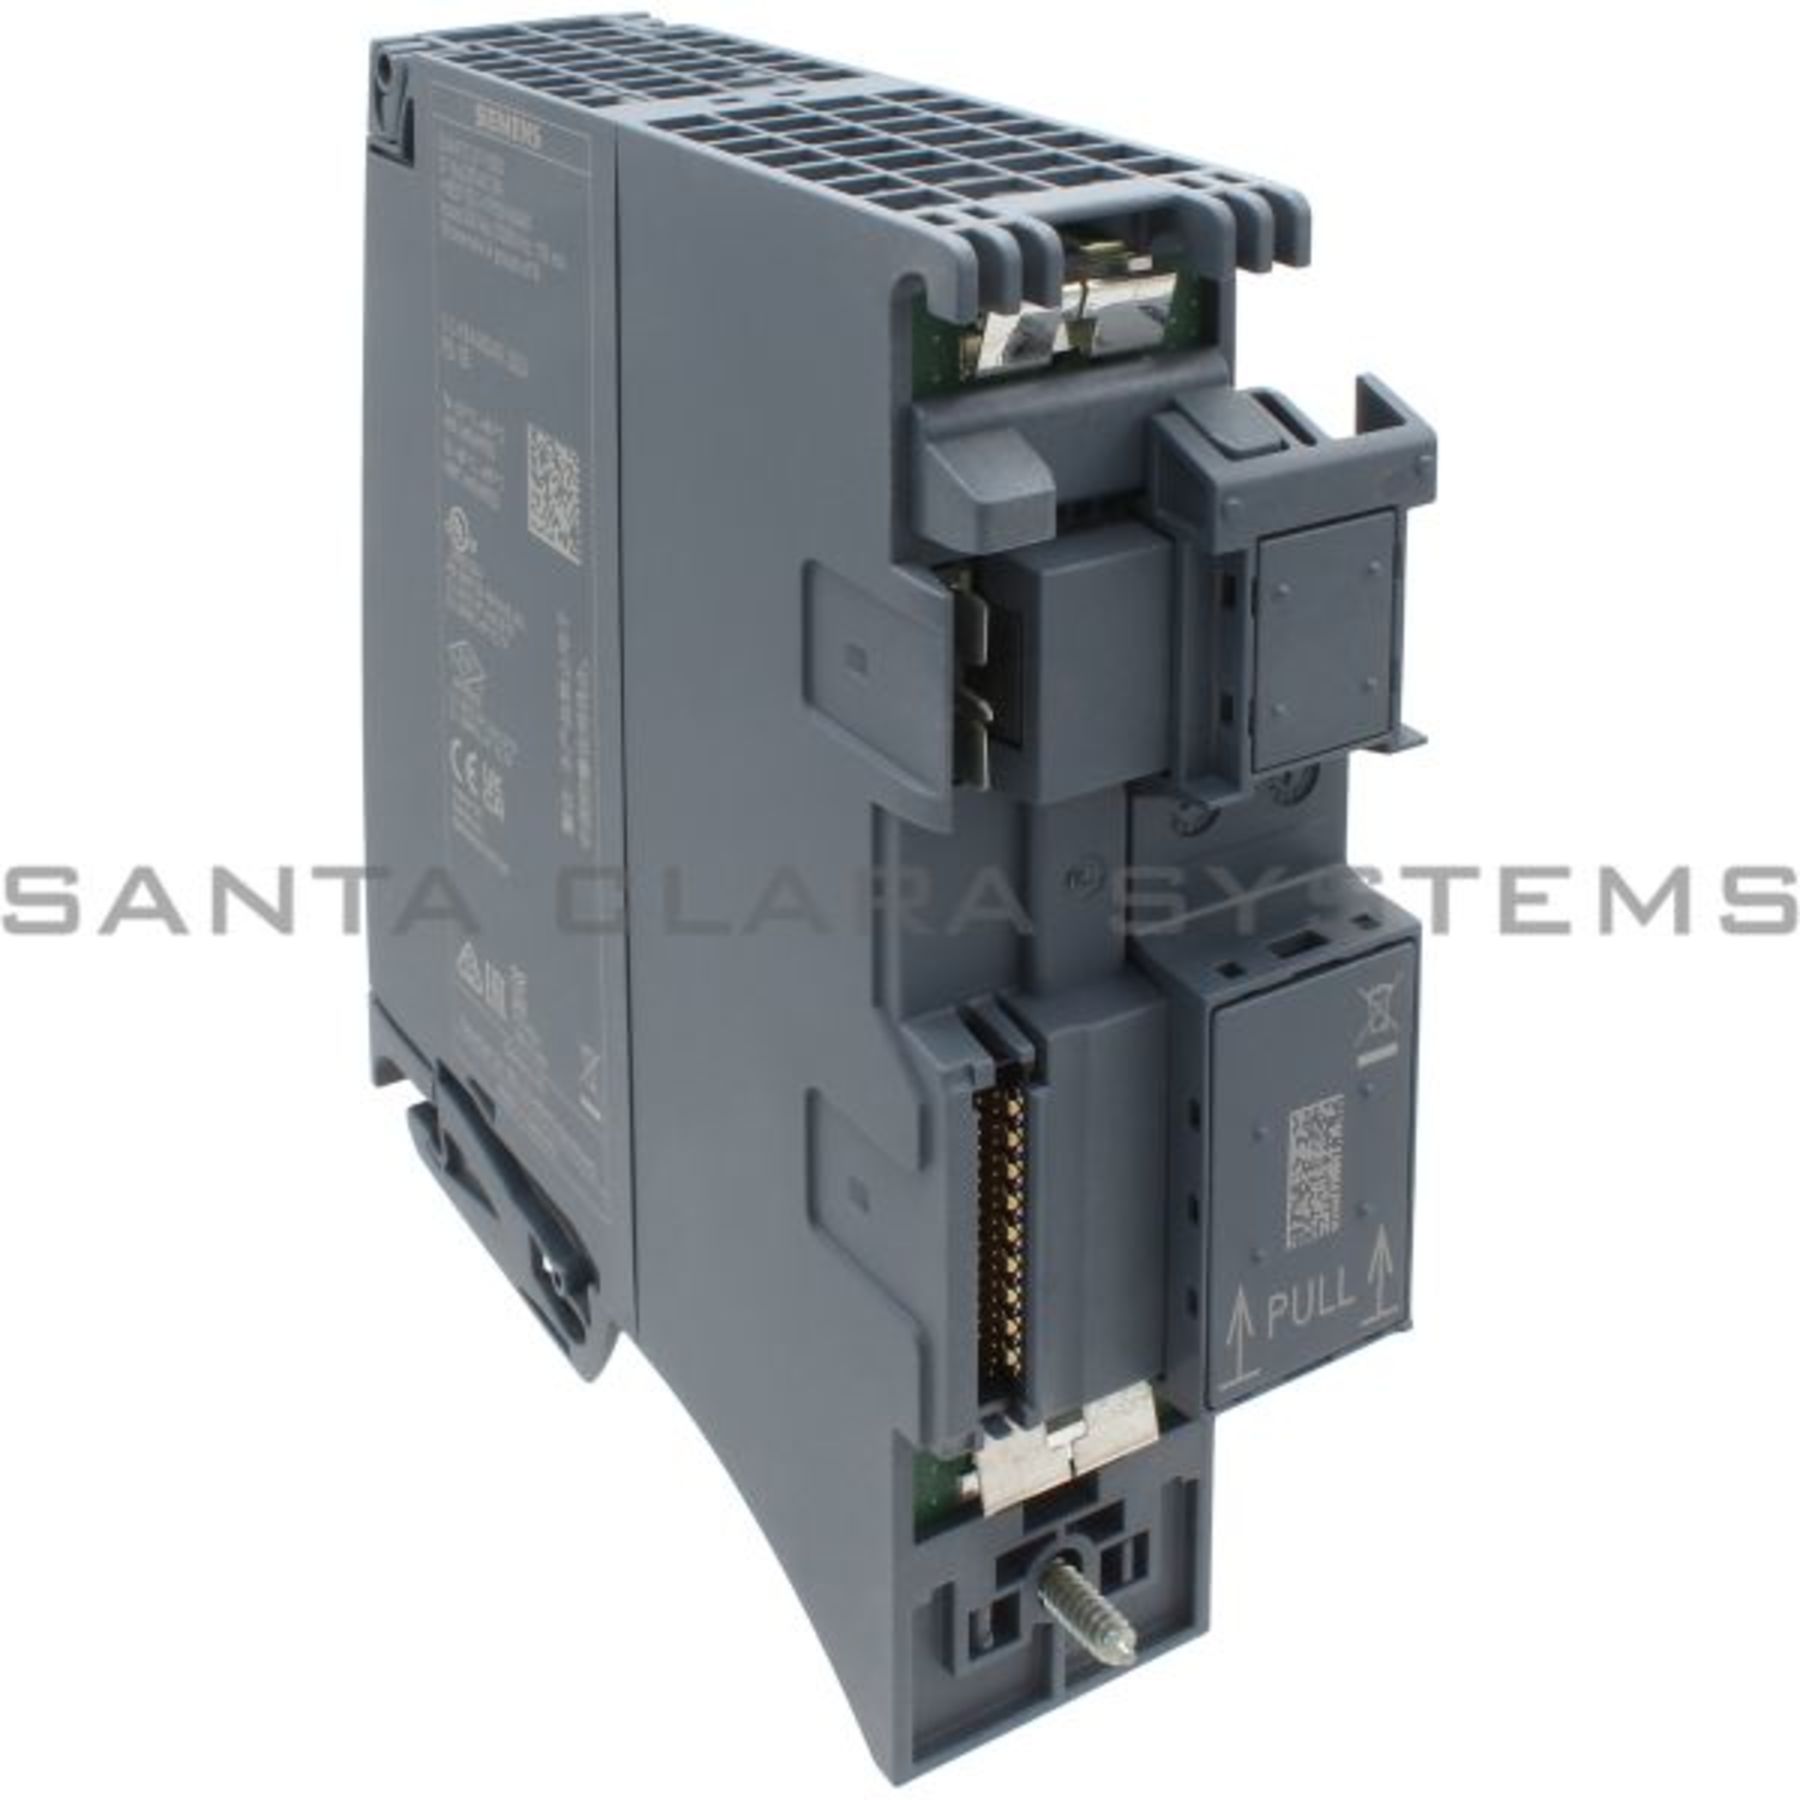 6ES7521-1FH00-0AA0 Siemens In stock and ready to ship - Santa